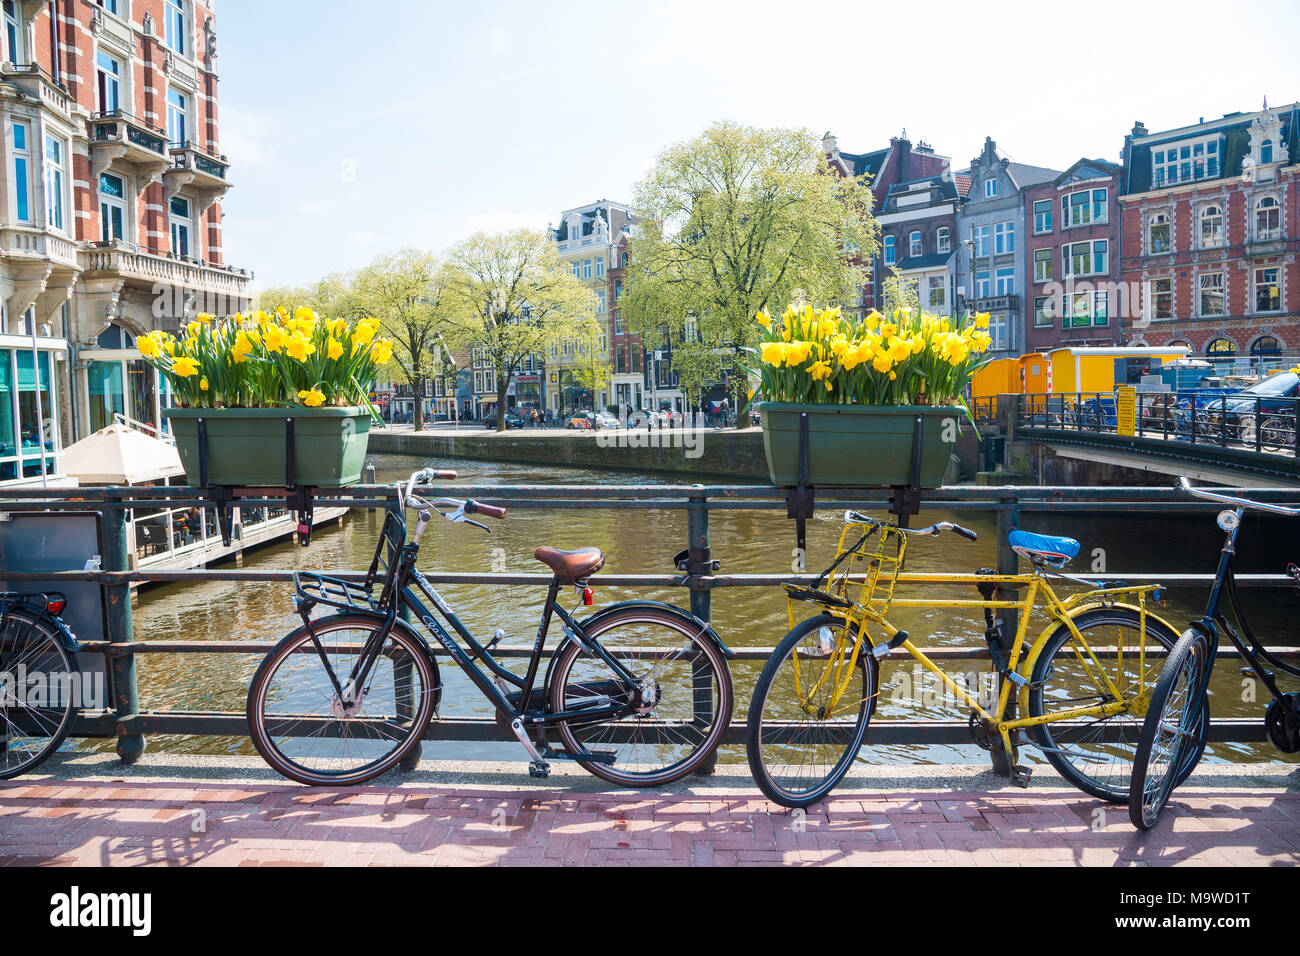 Amsterdam, Netherlands - April 20, 2017: Bicycles parked on a bridge in Amsterdam, The Netherlands Stock Photo